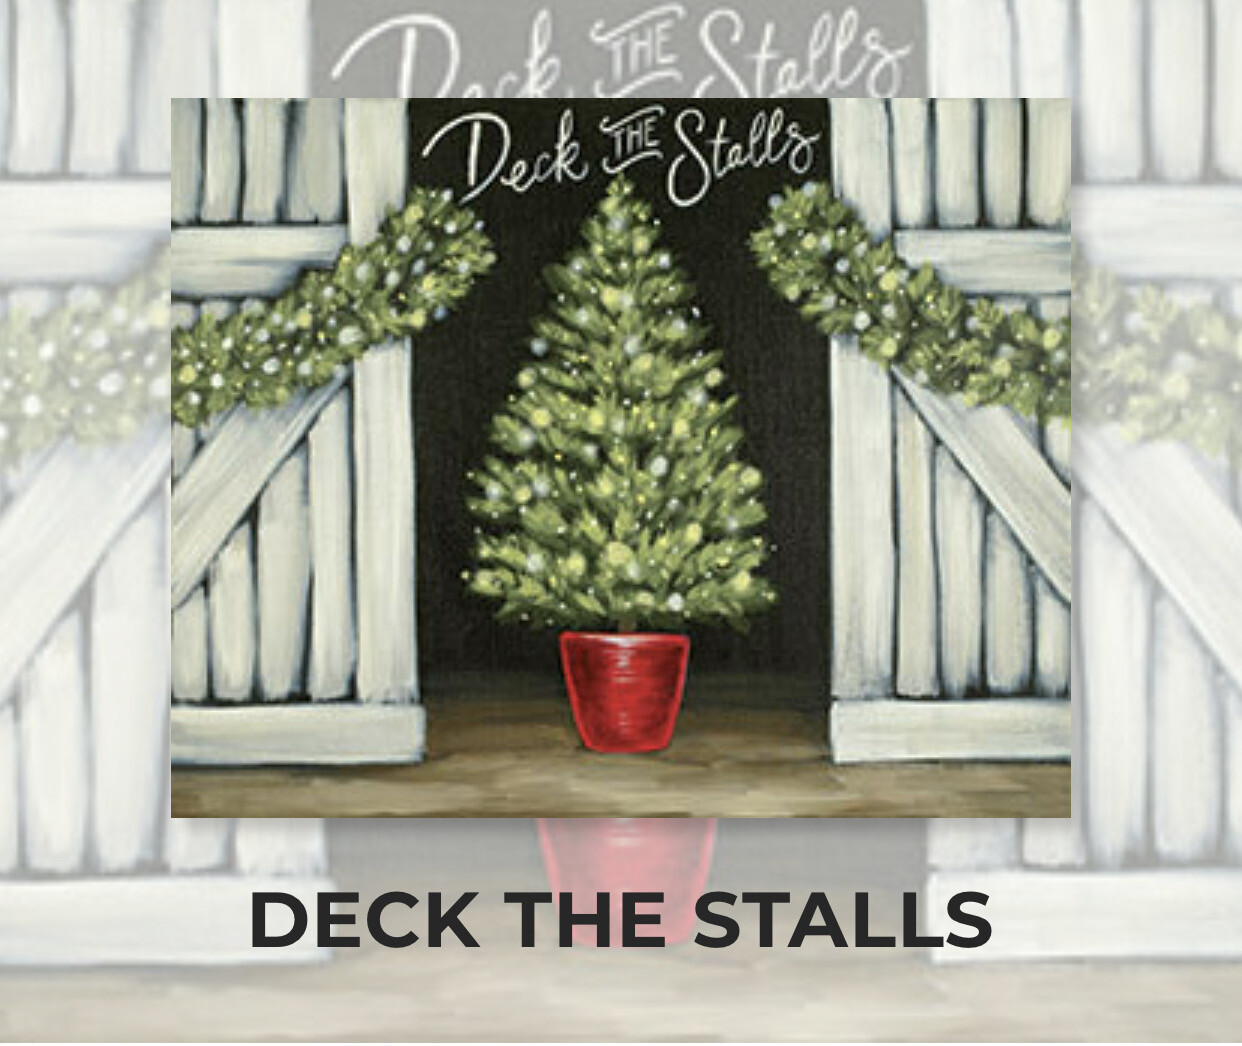 Deck the Stalls ADULT Acrylic Paint On Canvas DIY Art Kit - 3 Week Special Order